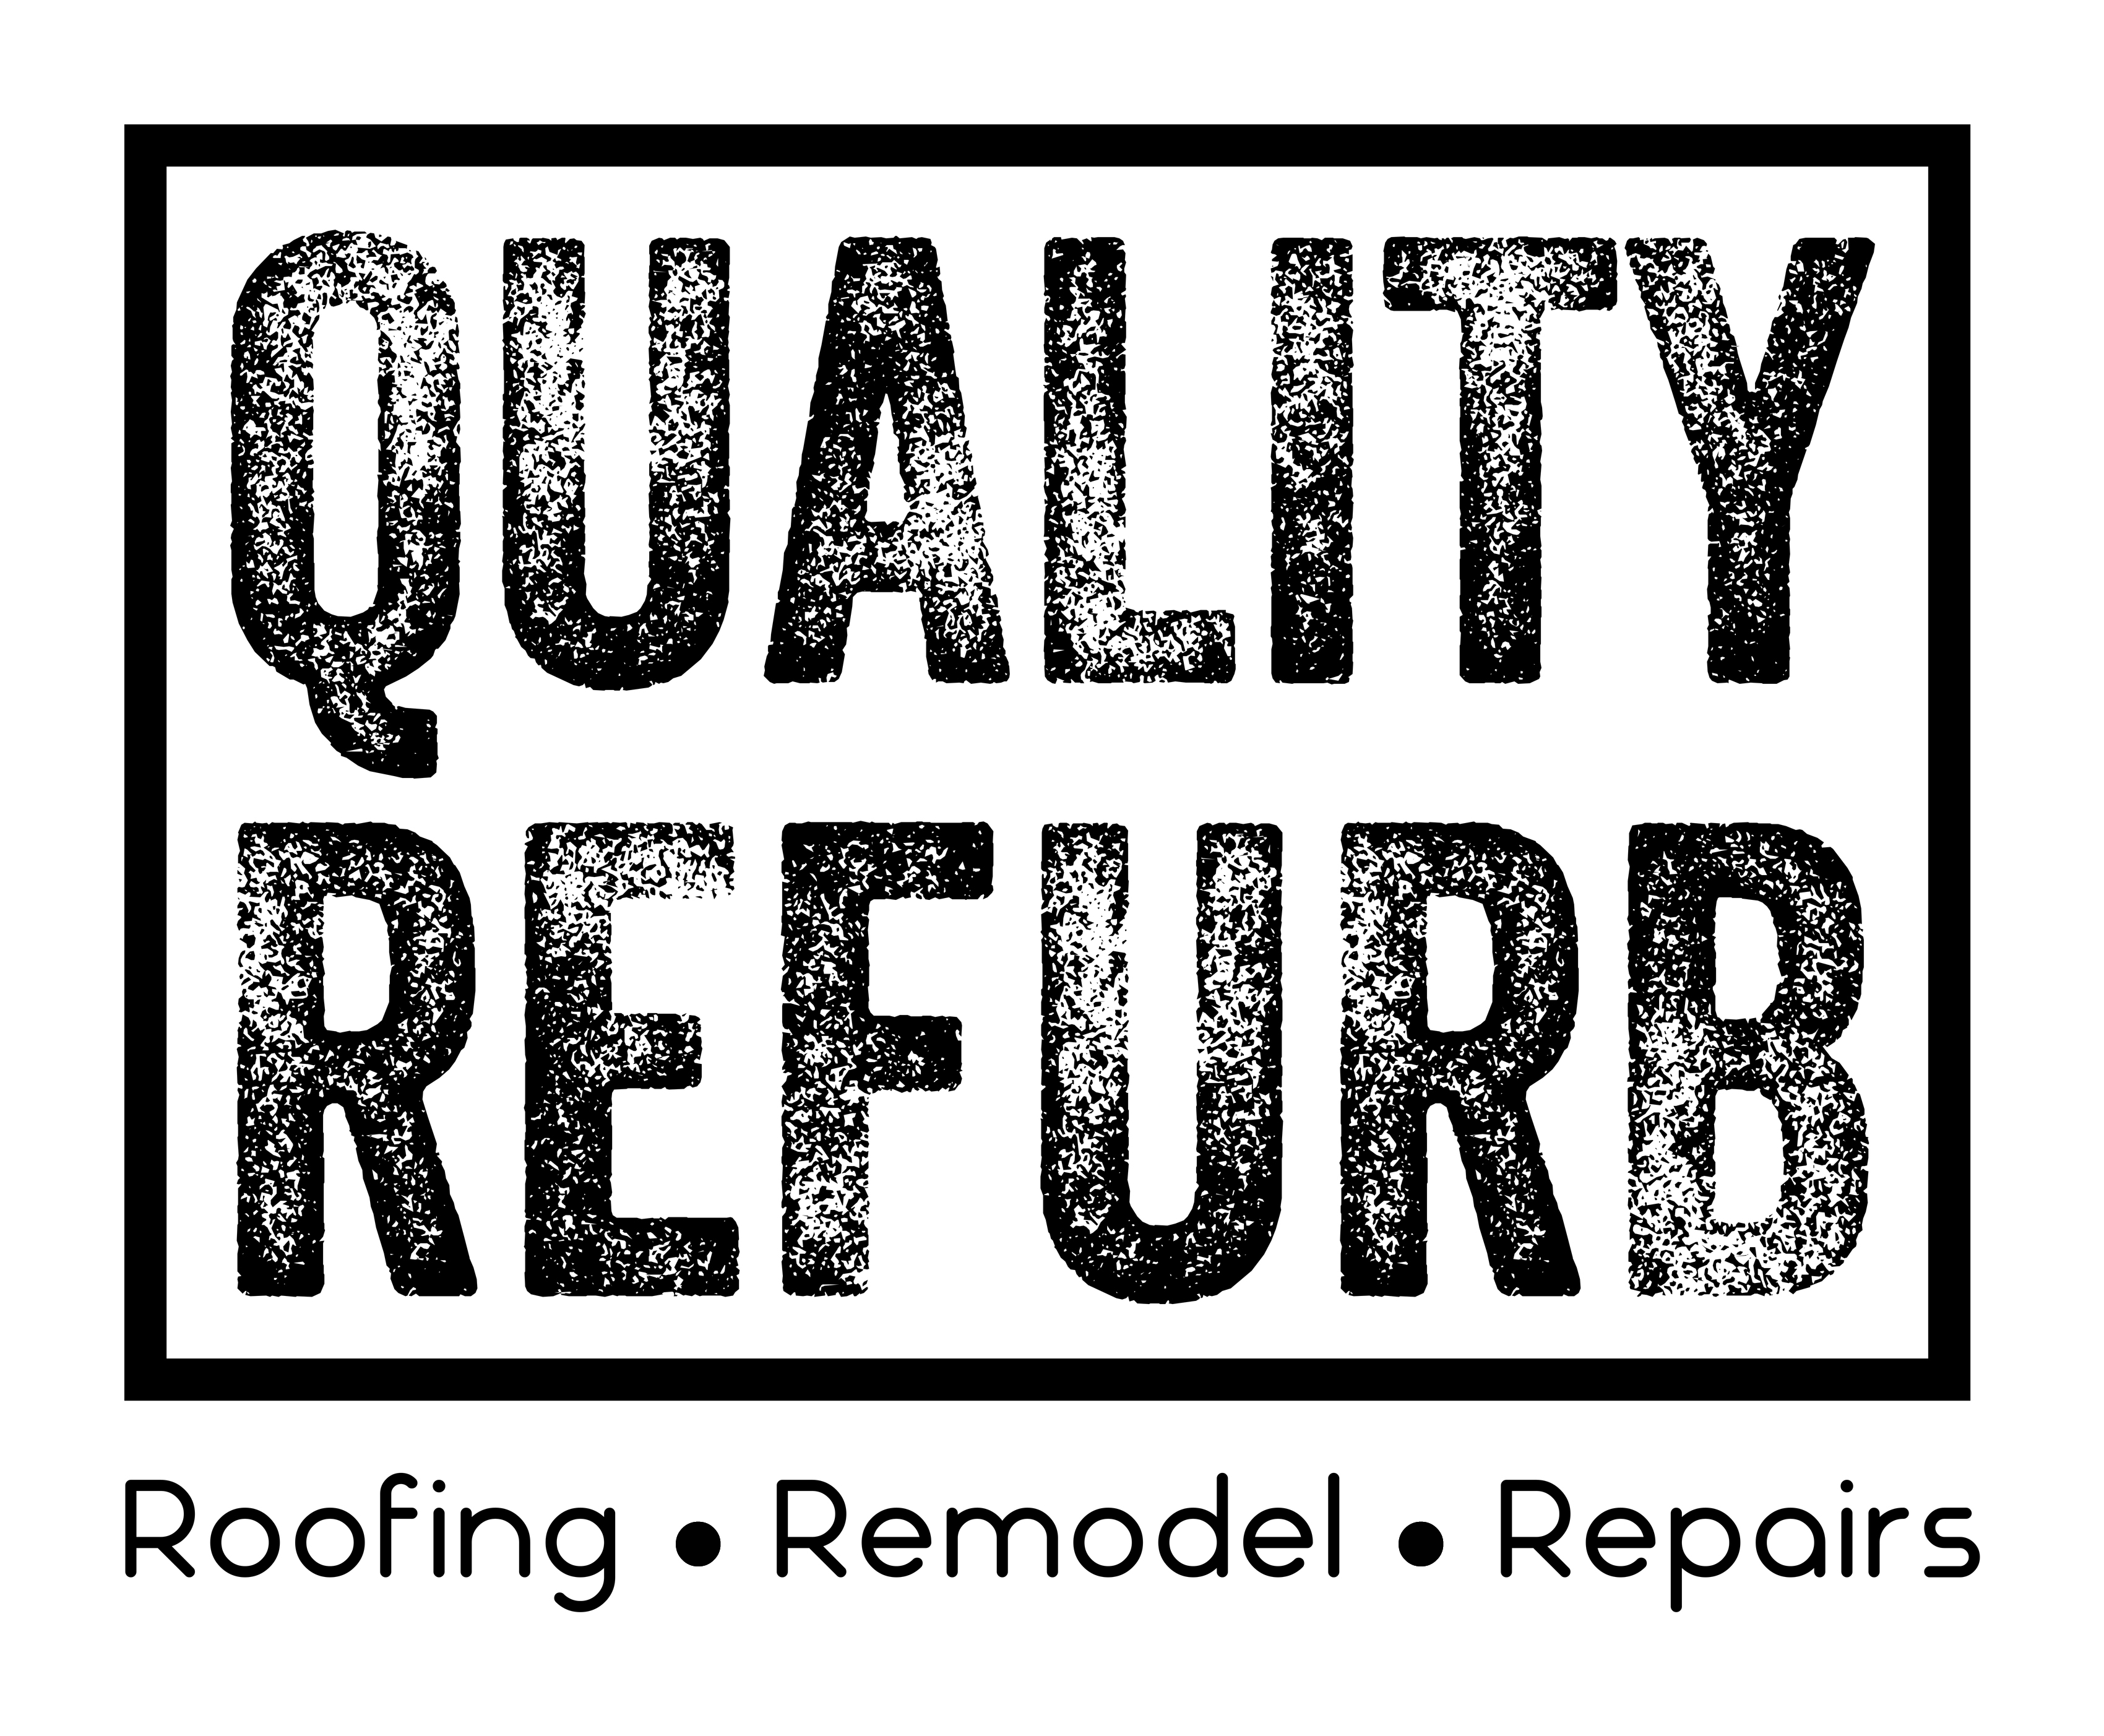 Quality Refurb Roofing Construction is a one stop solution for roofing jobs in Nashville